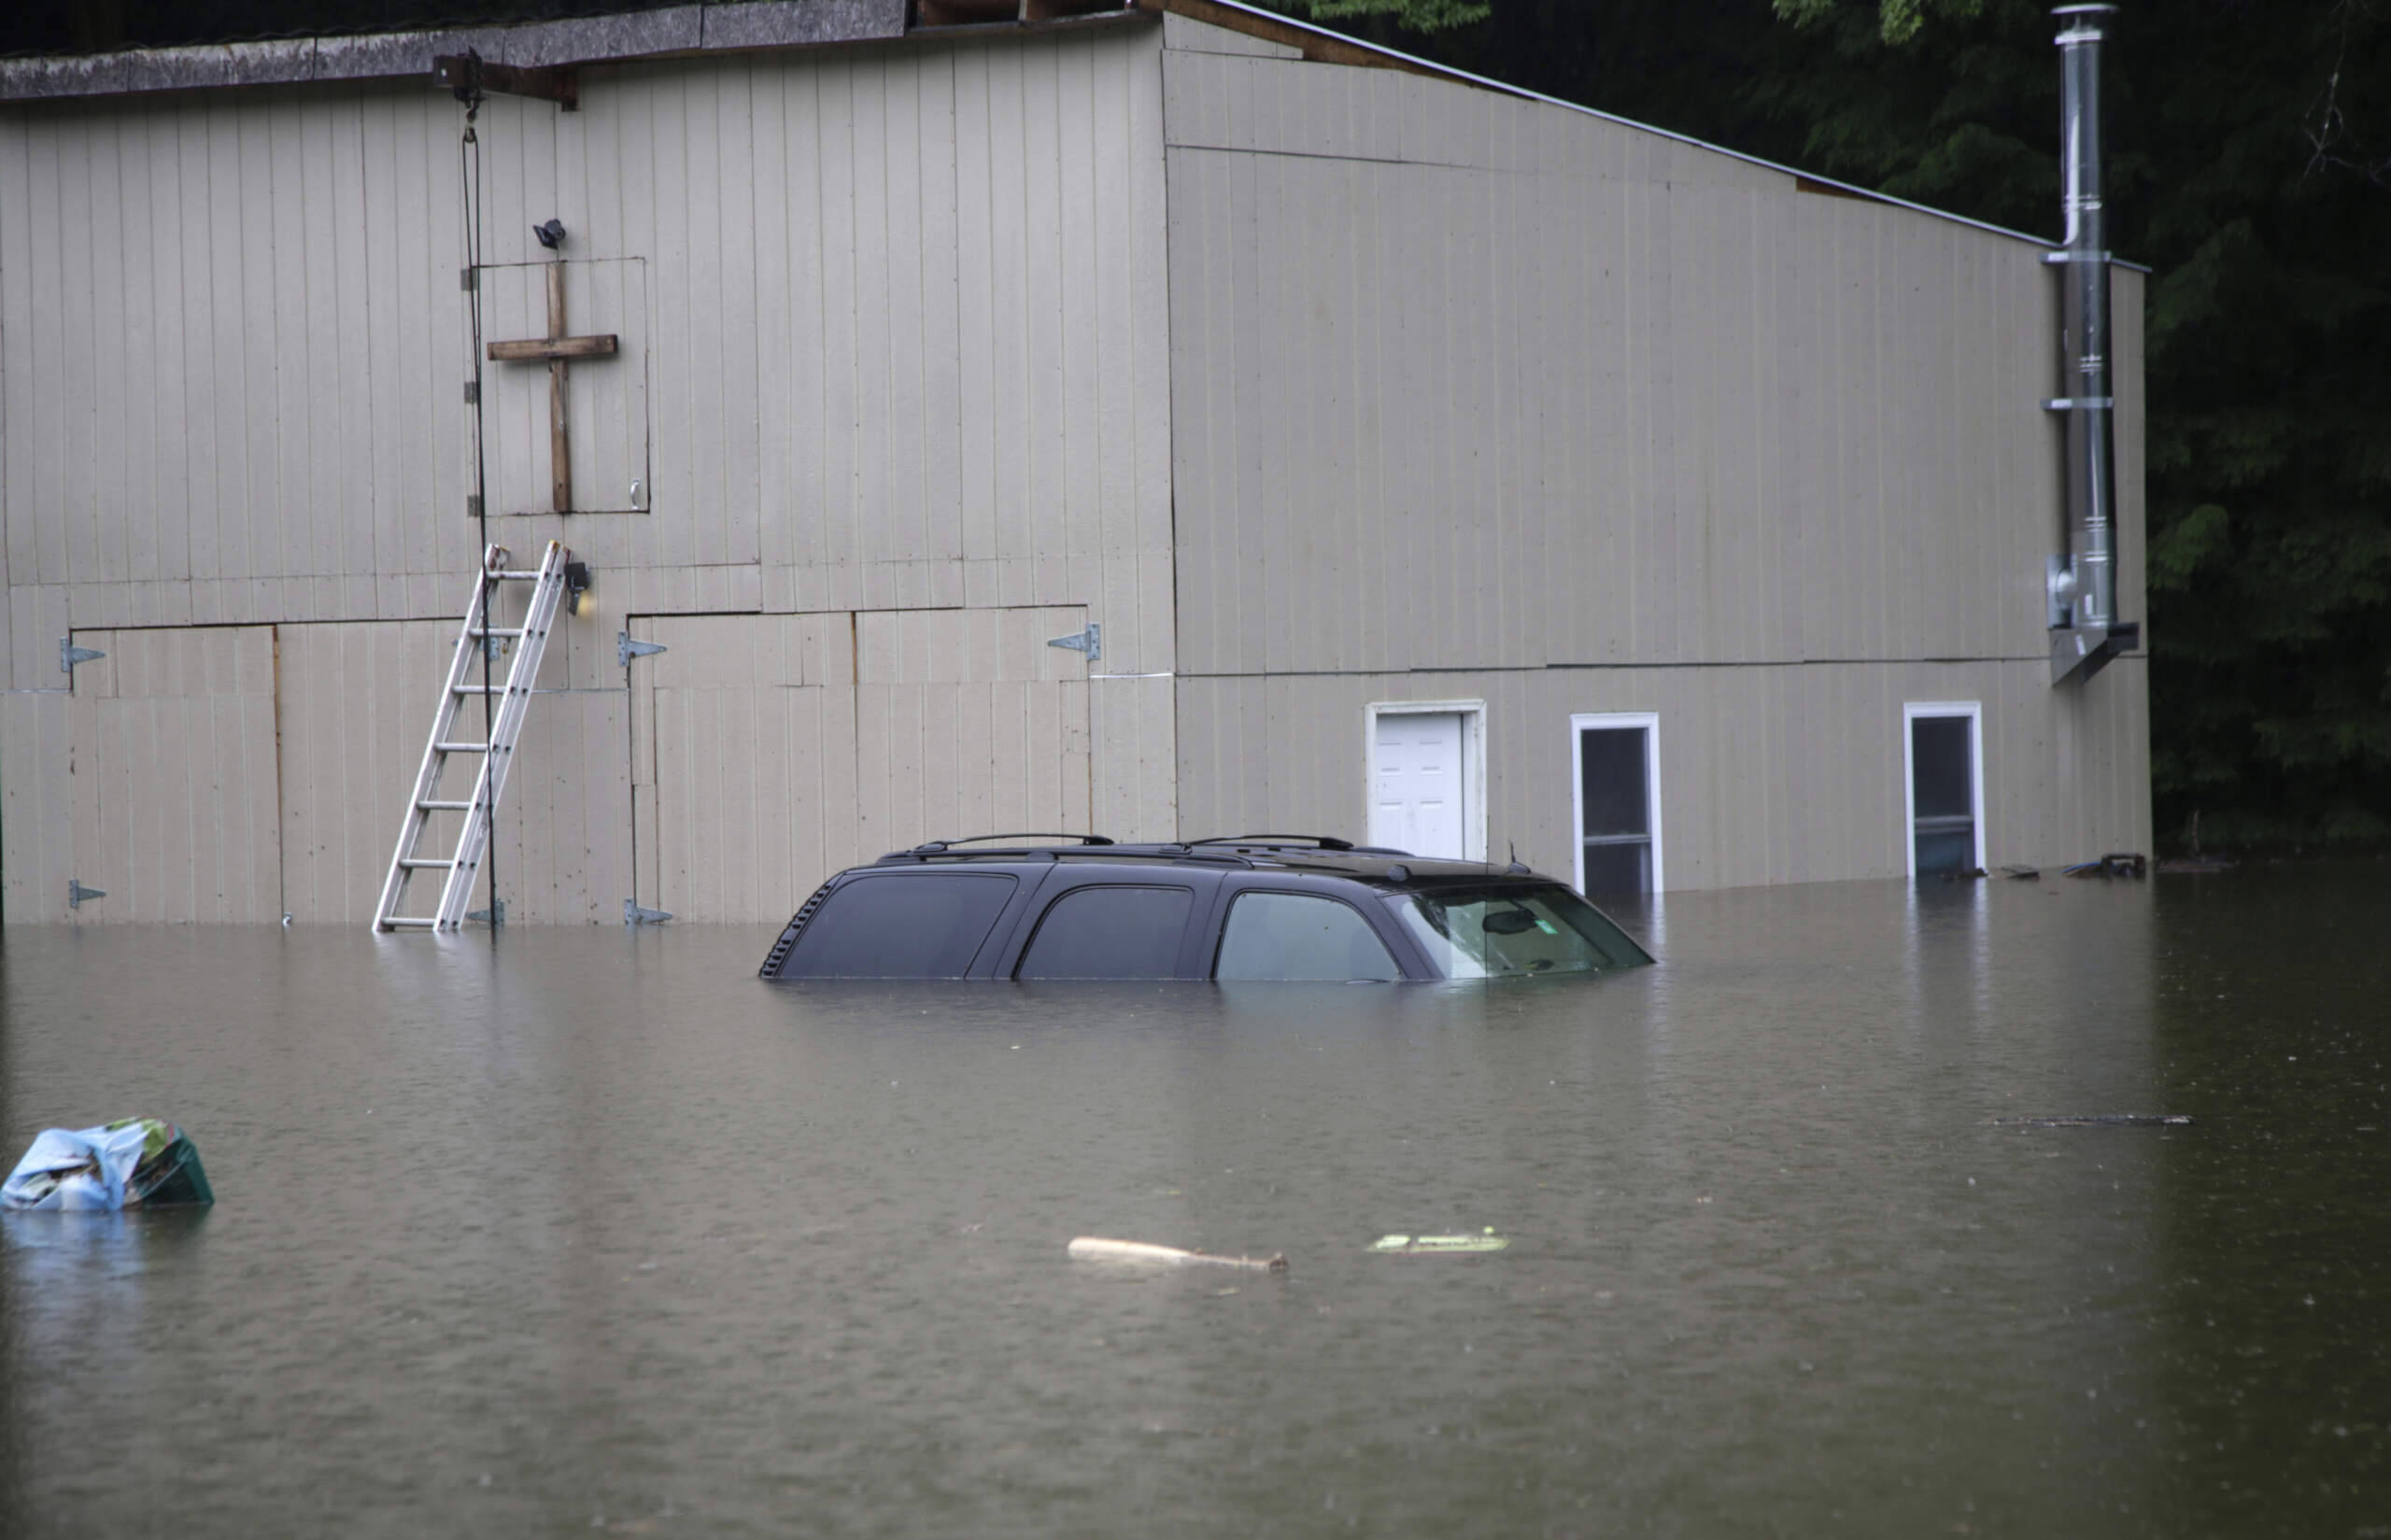 Floodwaters rise in Bridgewater, Vt., on July 10, 2023, submerging parked vehicles and threatening homes near the Ottauquechee River. (Hasan Jamali/AP)